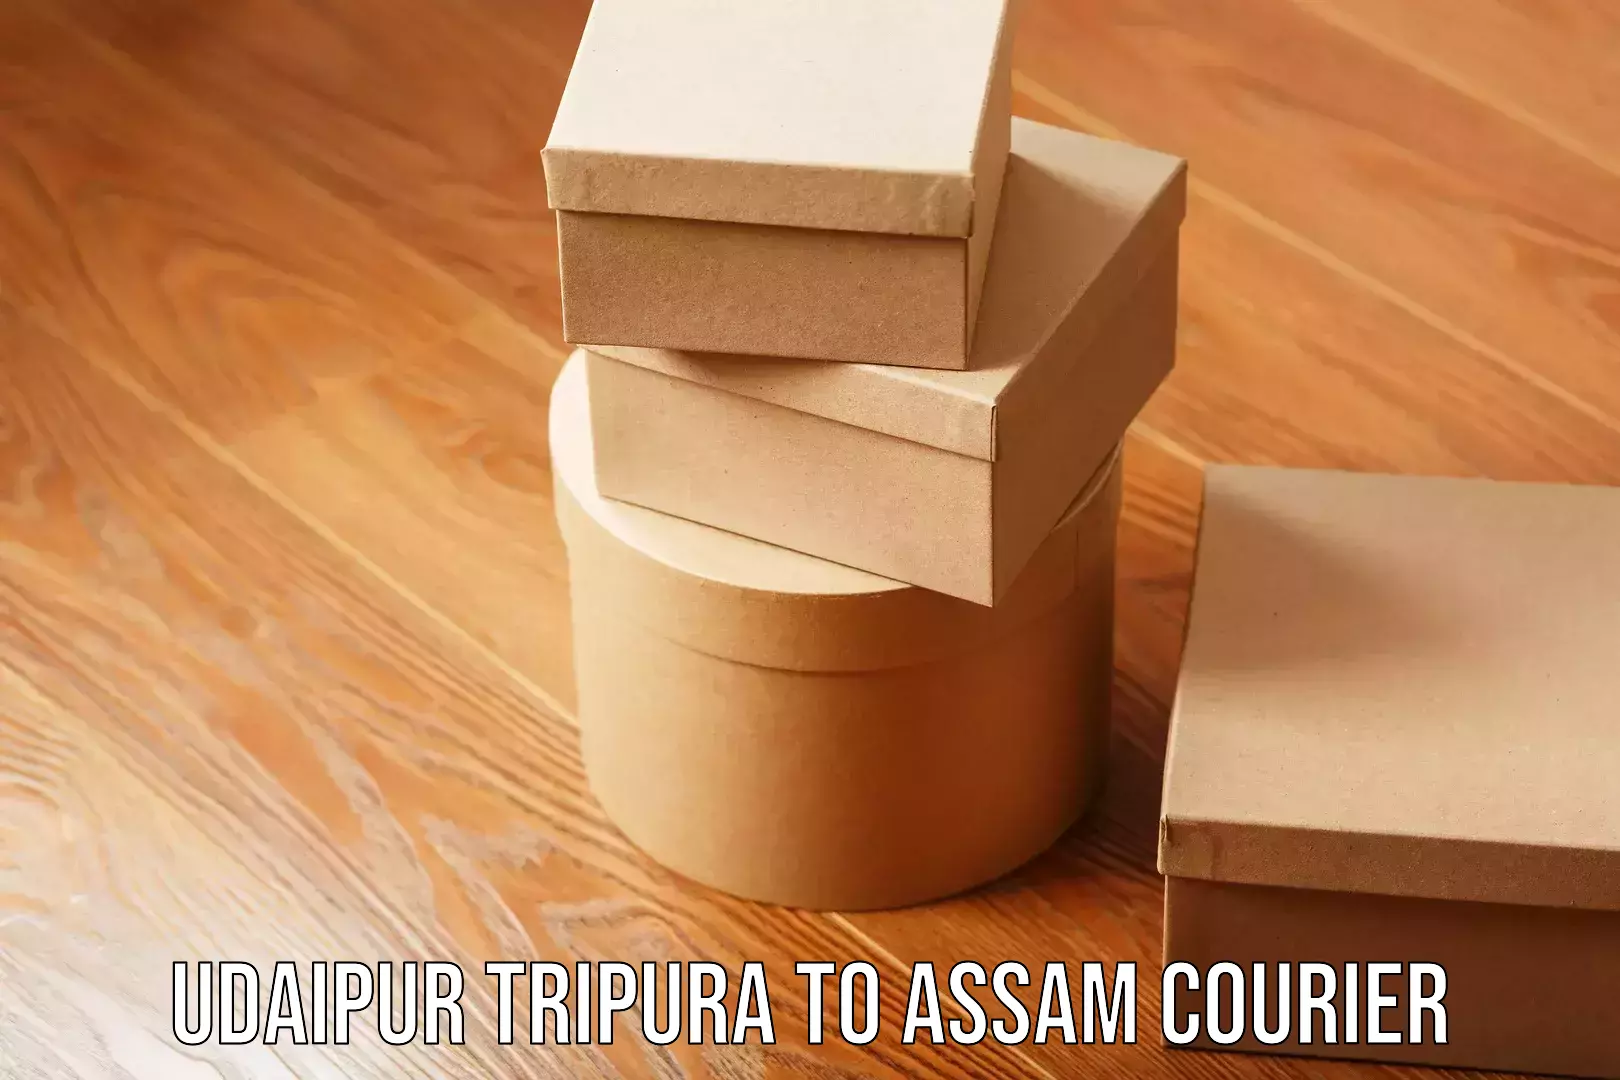 Cargo delivery service Udaipur Tripura to Assam